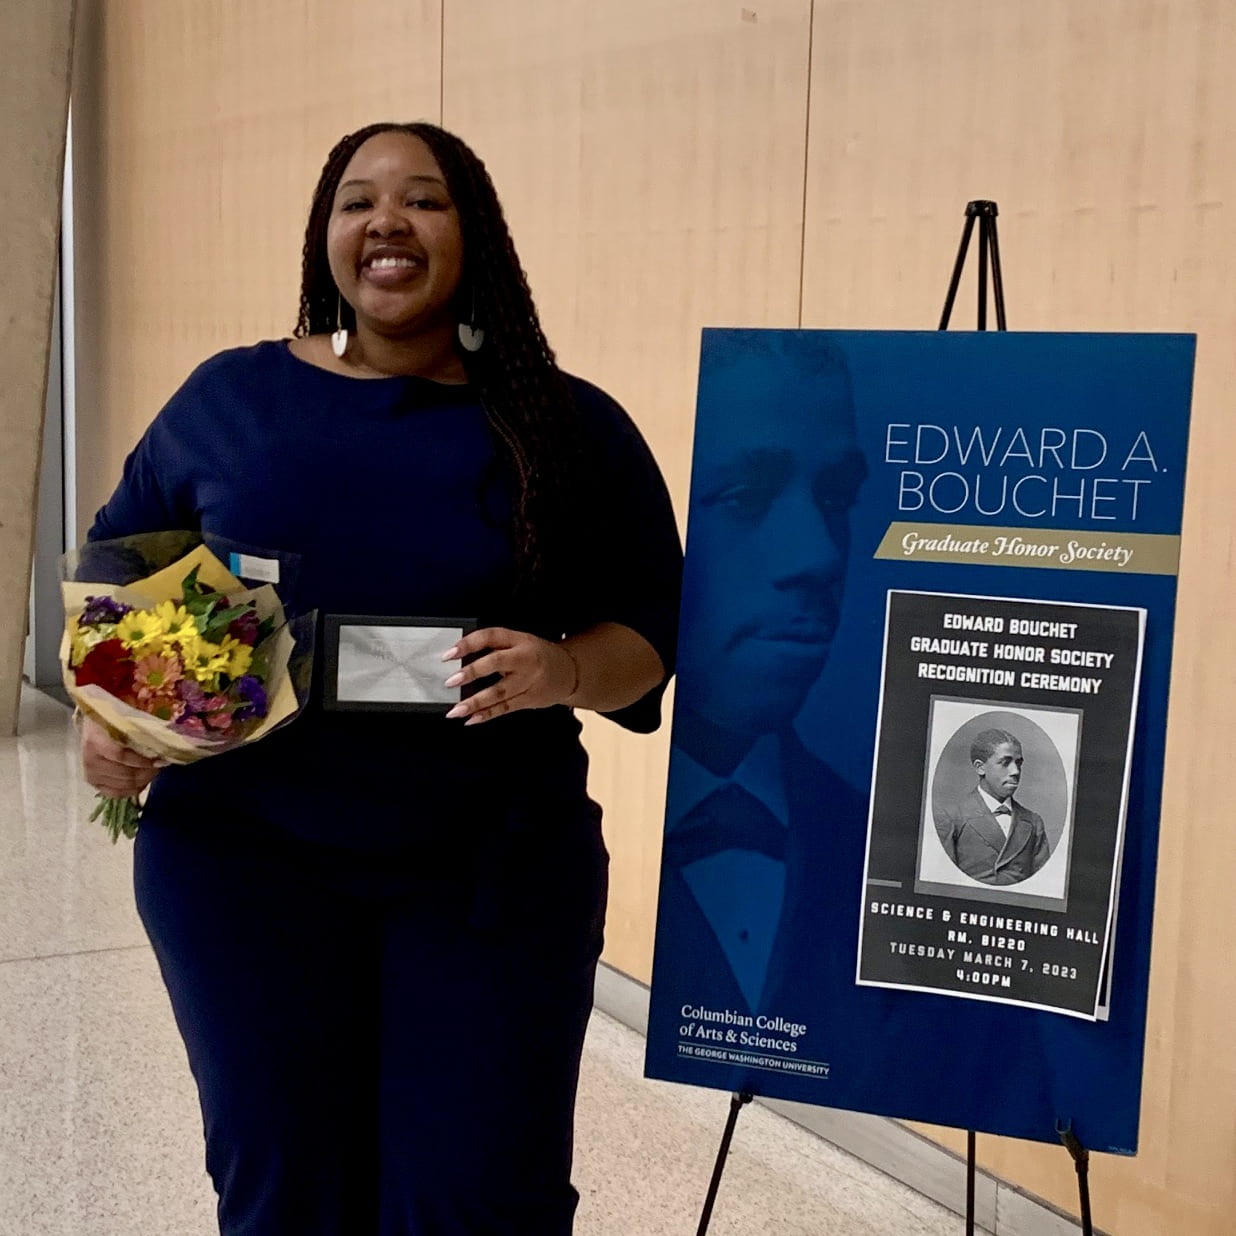 Simone Sawyer at the GW Edward Bouchet Graduate Honor Society Recognition Ceremony